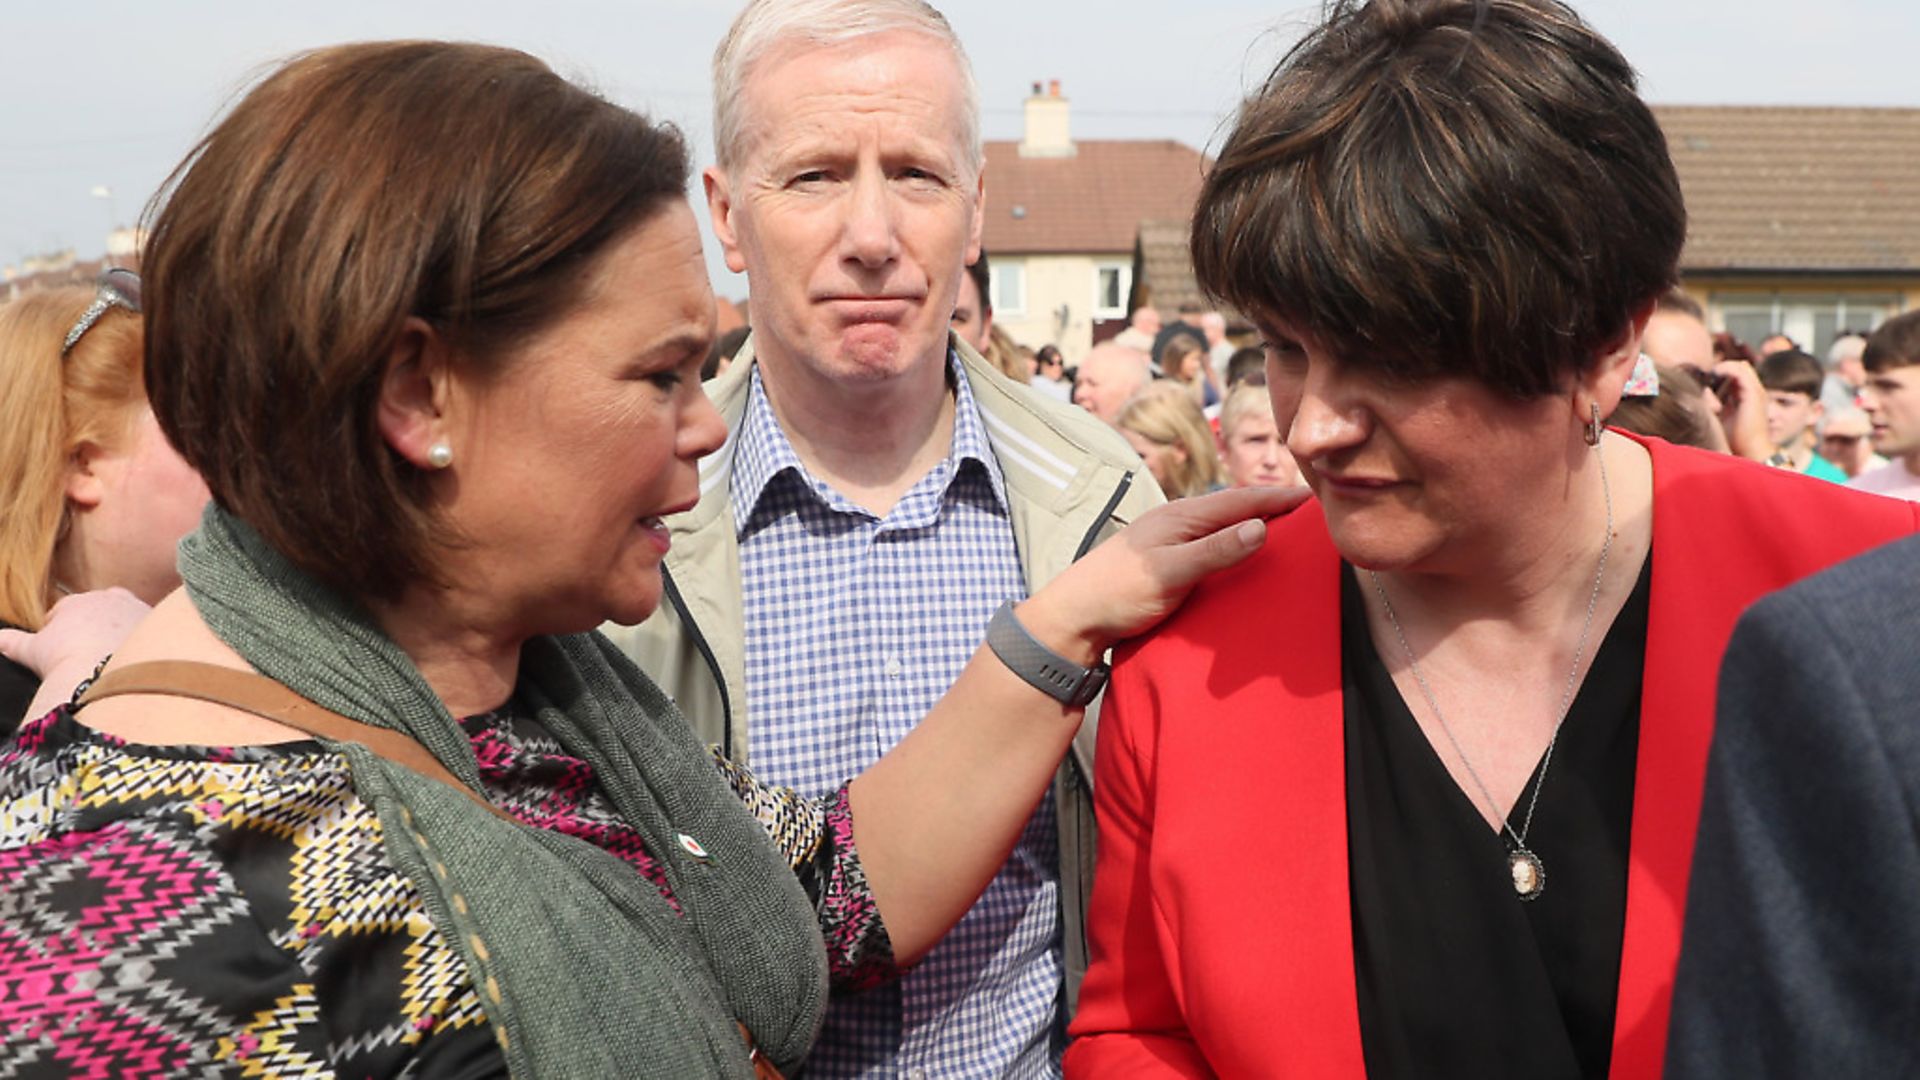 Sinn Feinleader Mary Lou McDonald (left) has told DUP leader Arlene Foster (right) that she shouldn't have backed Brexit if she didn't want a customs border in the Irish Sea. Picture: Brian Lawless/PA Archive/PA Images - Credit: PA Archive/PA Images